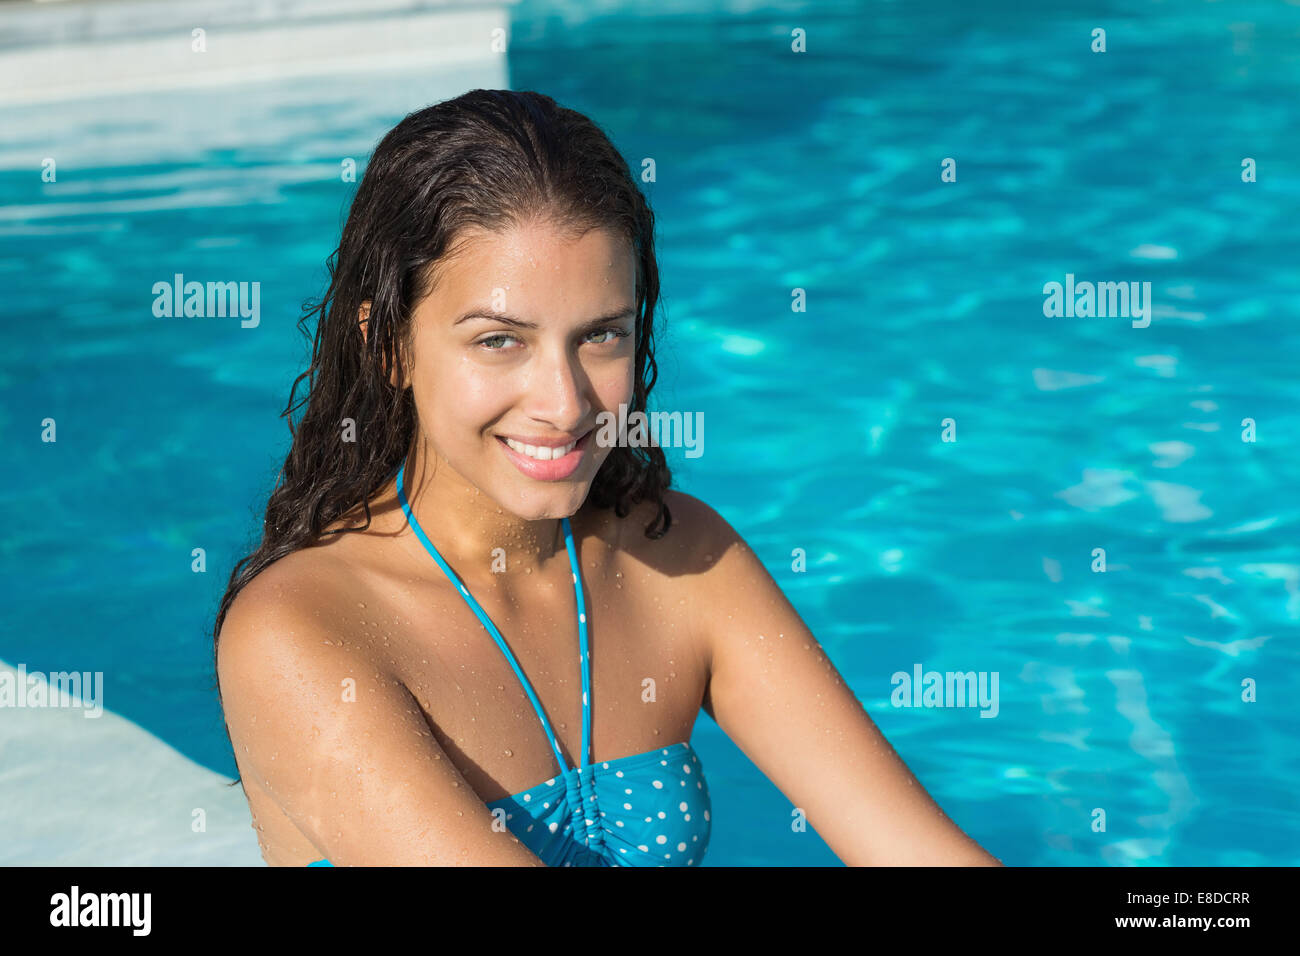 Portrait of a beautiful young woman by swimming pool Stock Photo